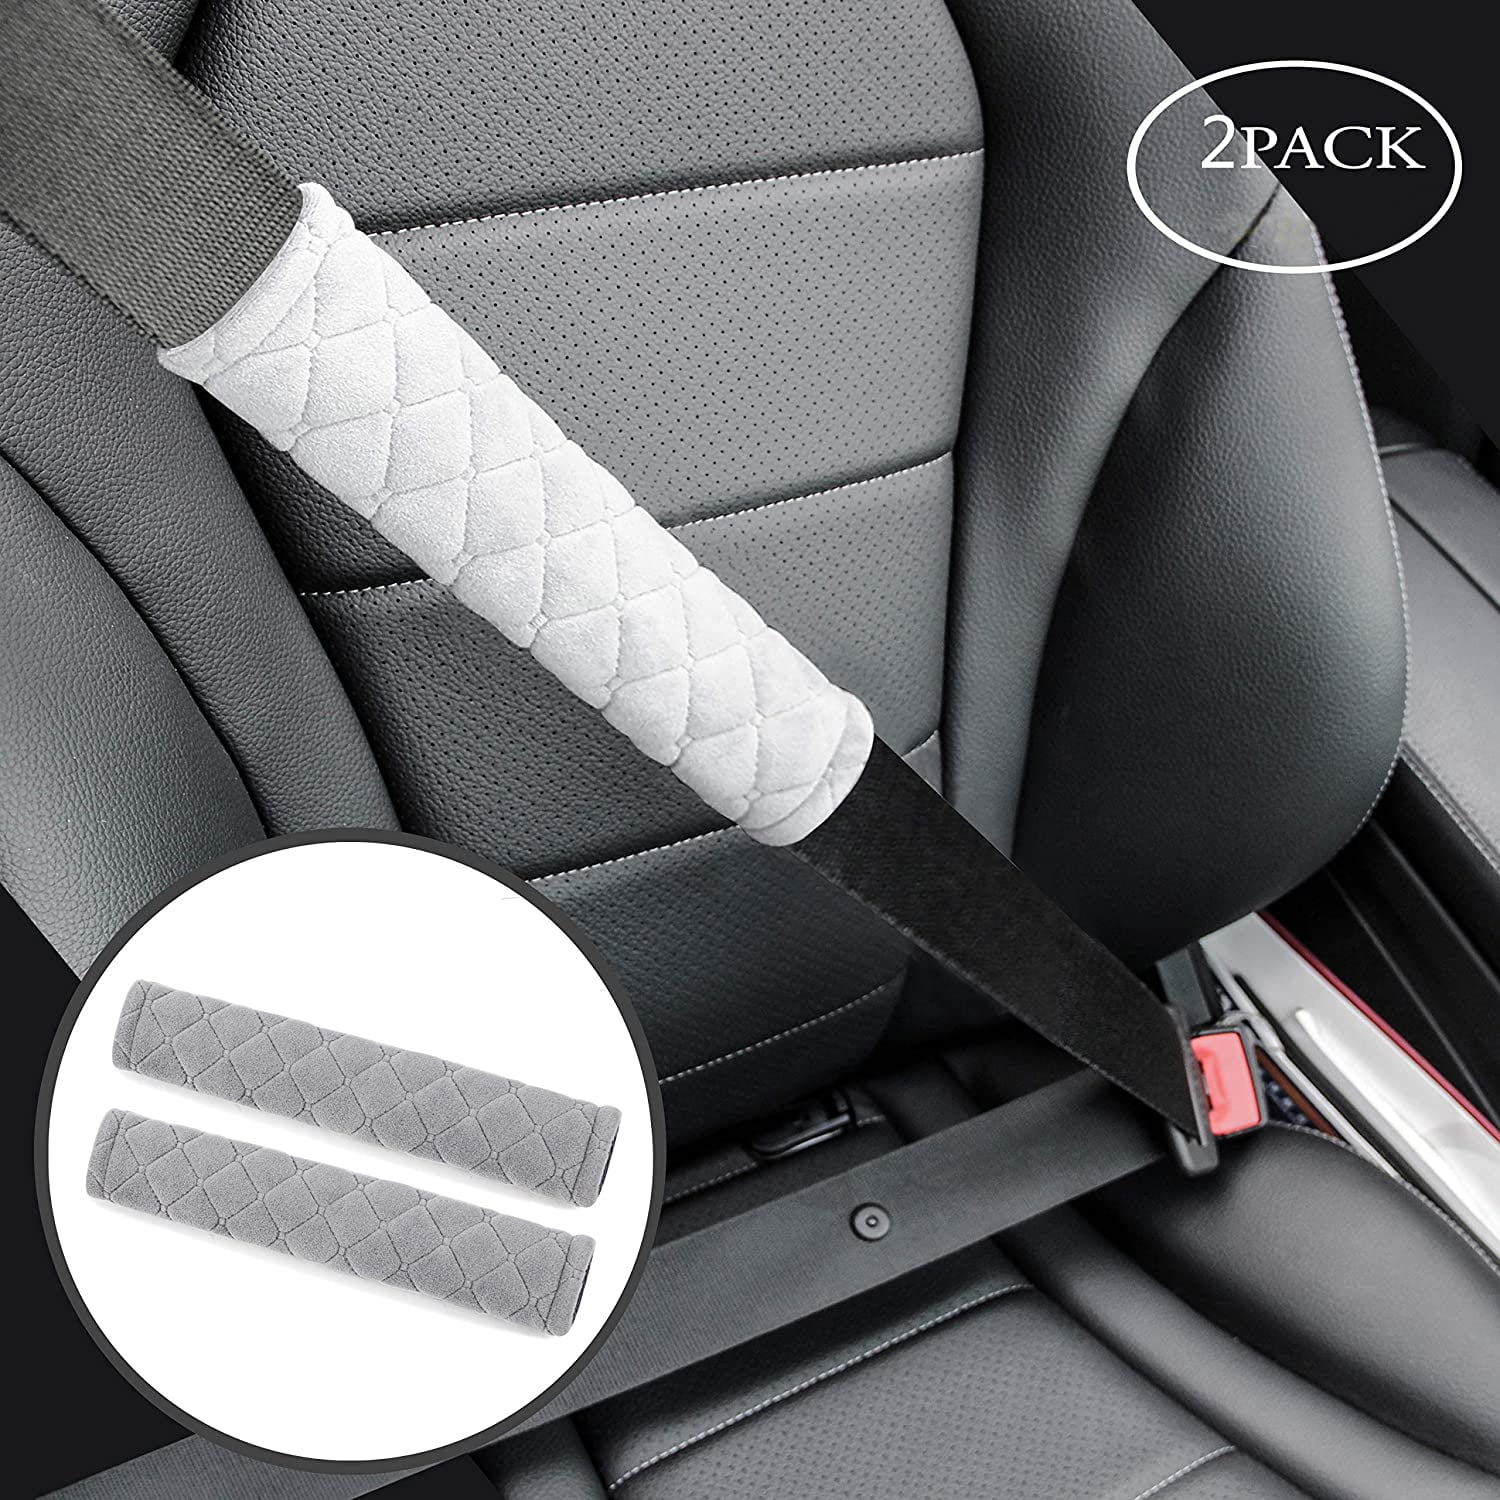 BESULEN Car Seat Belt Pads Cover, 2 Pack Leather Mesh Universal